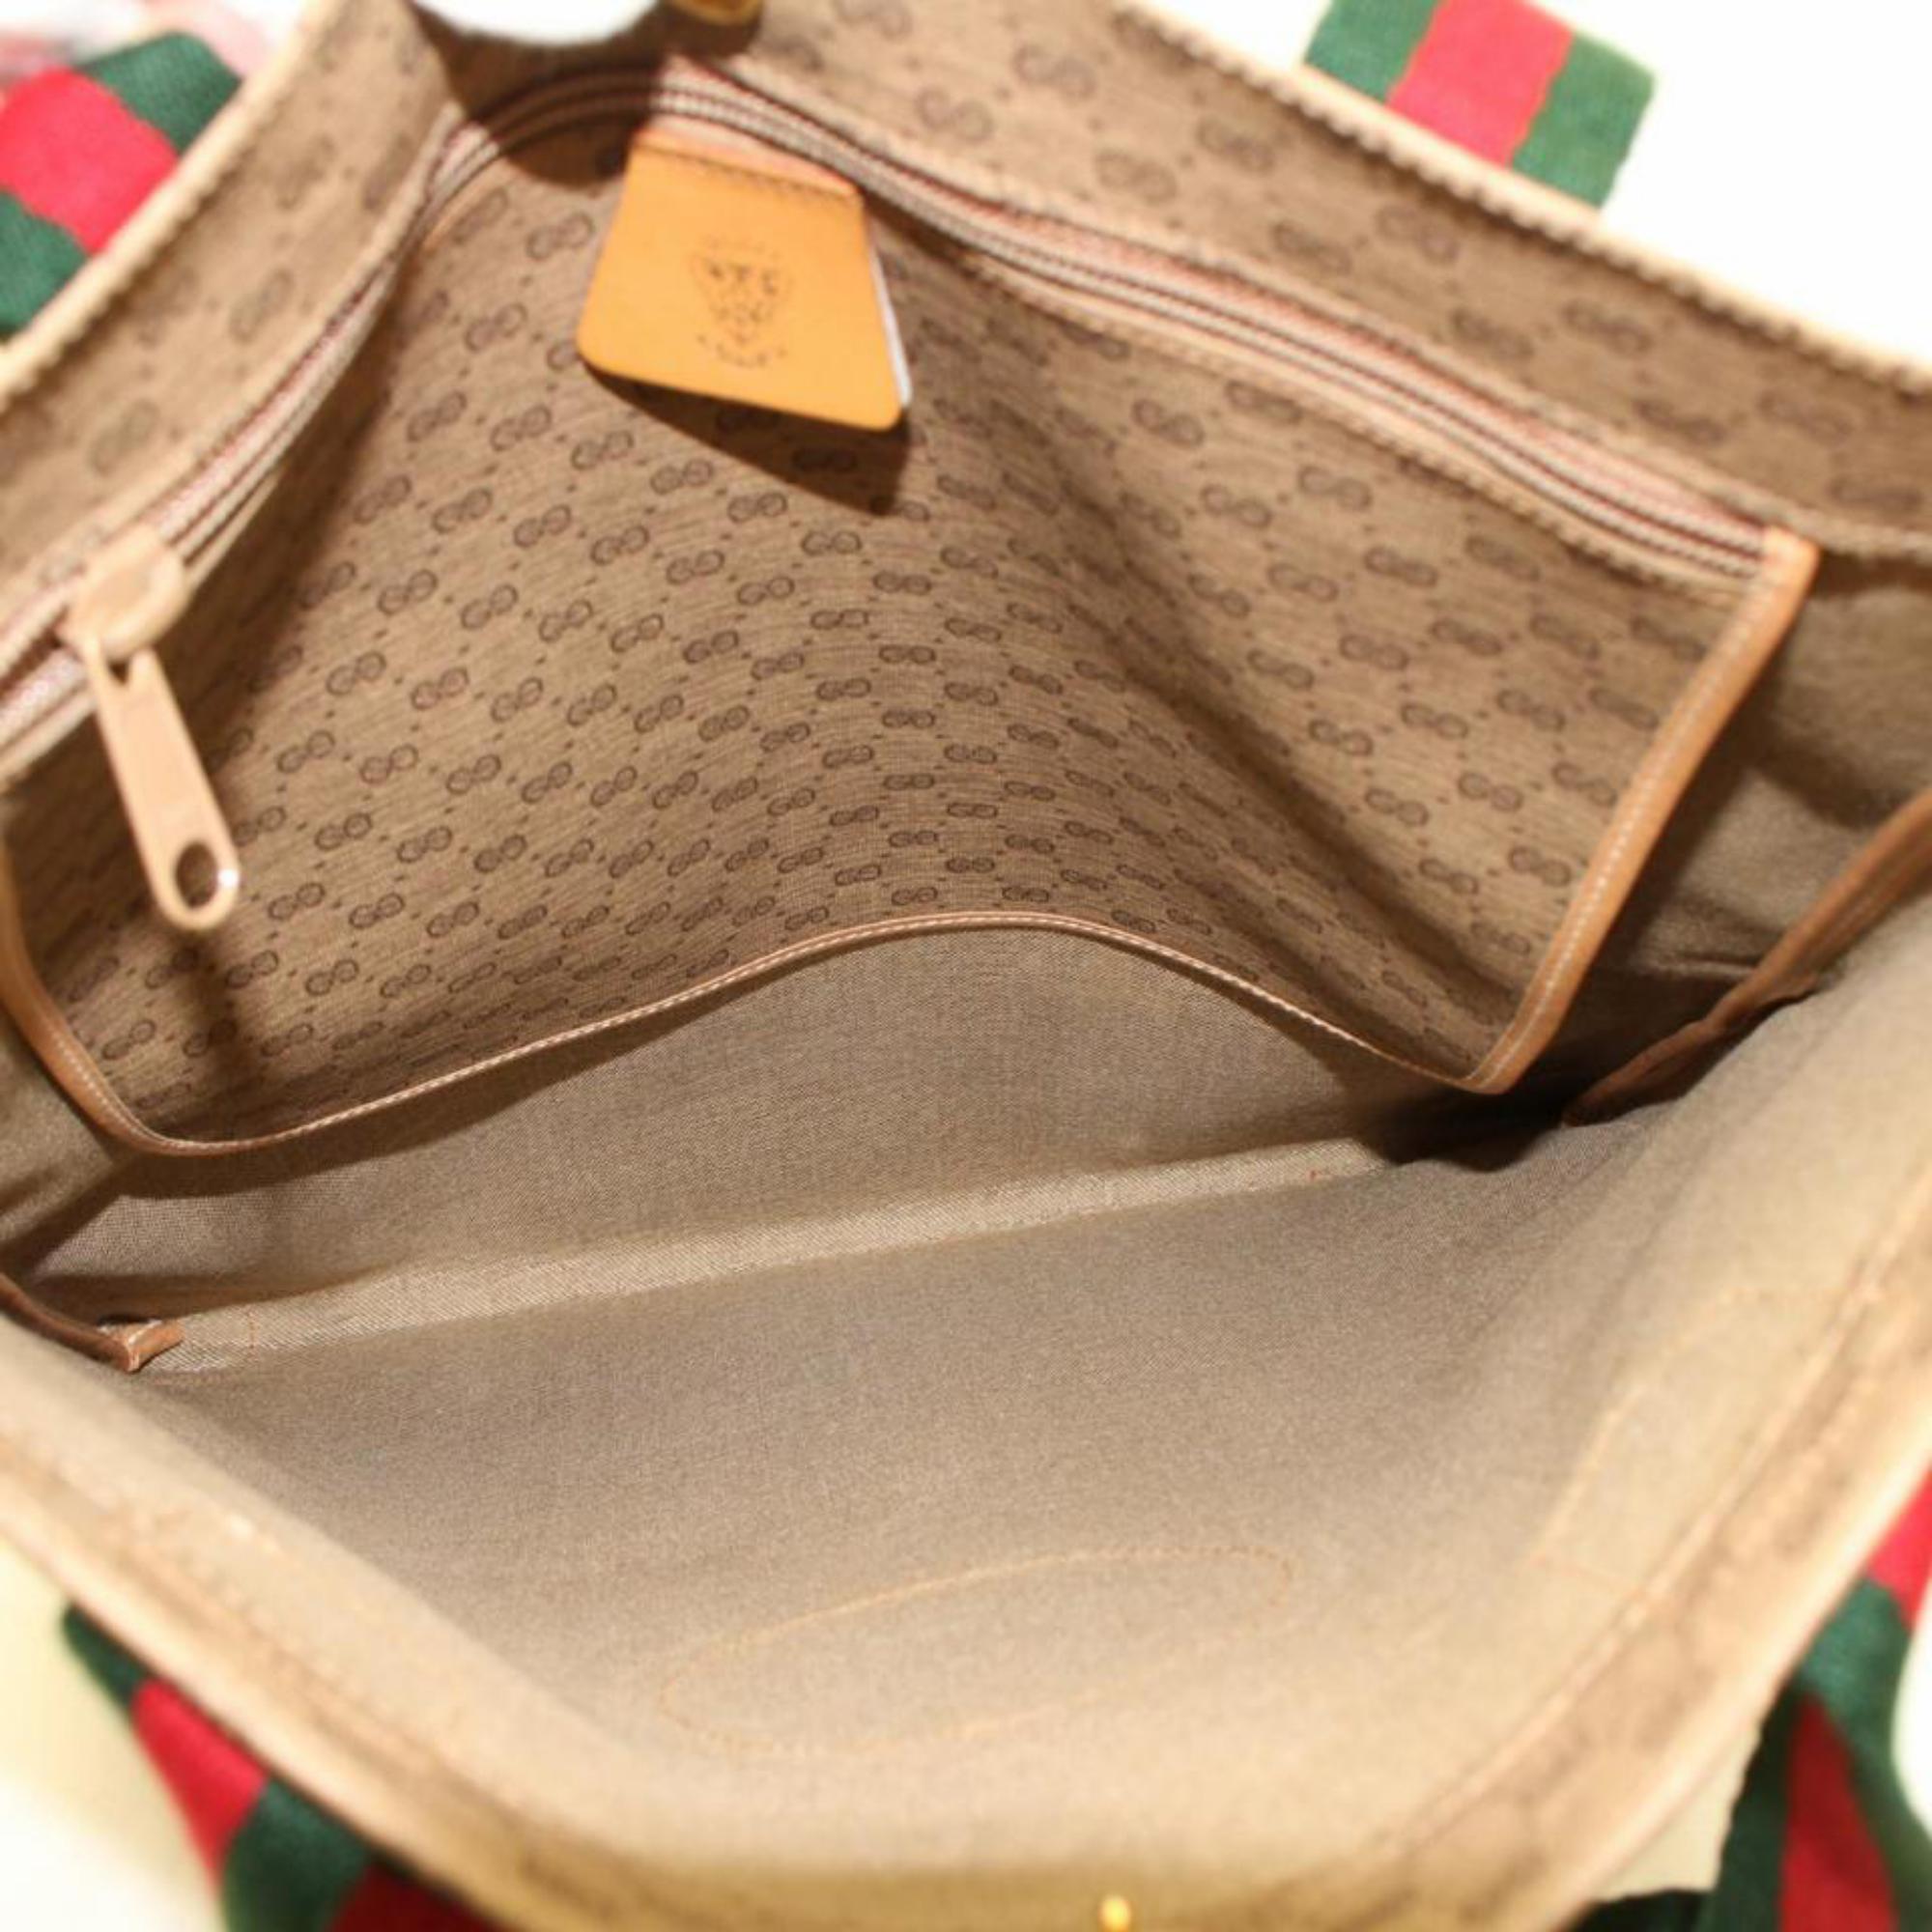 Gucci Web Micro Monogram Logo Tote 867526 Beige Coated Canvas Shoulder Bag In Good Condition For Sale In Forest Hills, NY